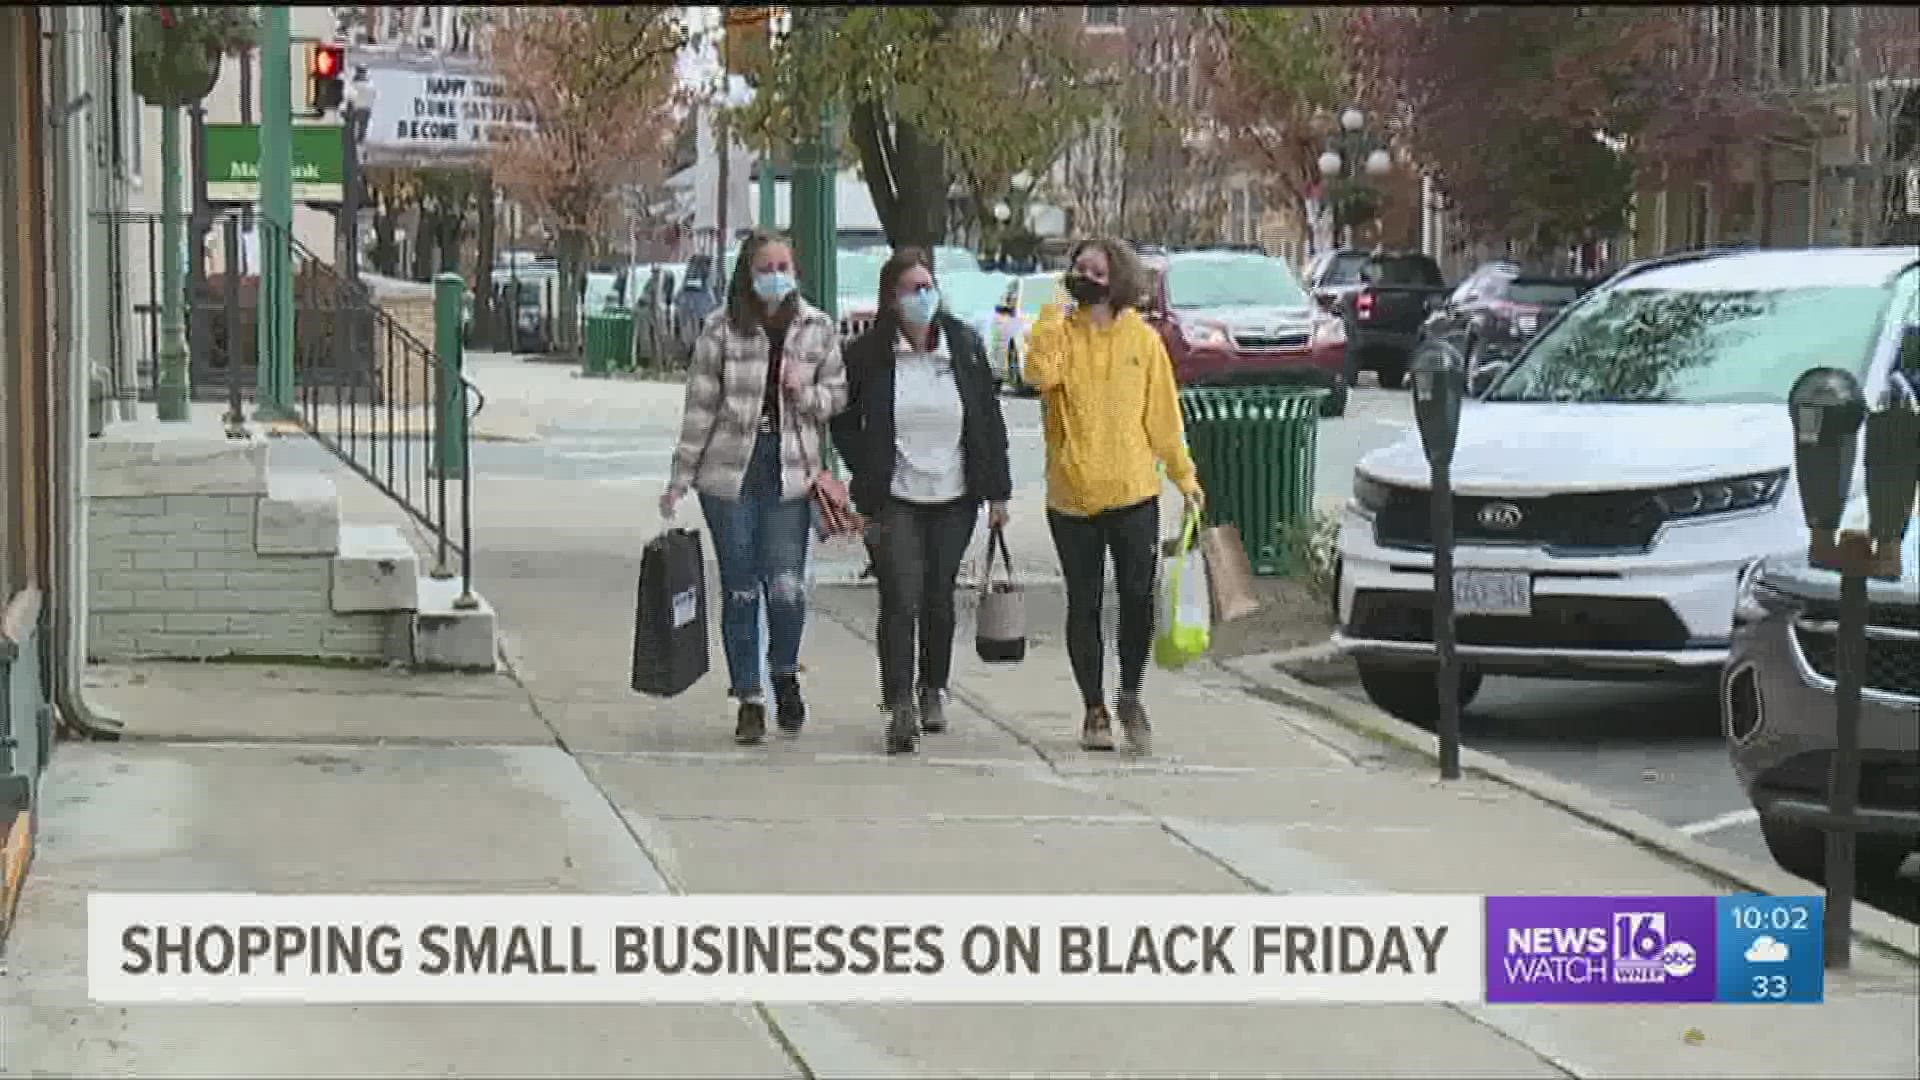 On historically one of the busiest shopping days of the year, shoppers took to Lewisburg to support small businesses.